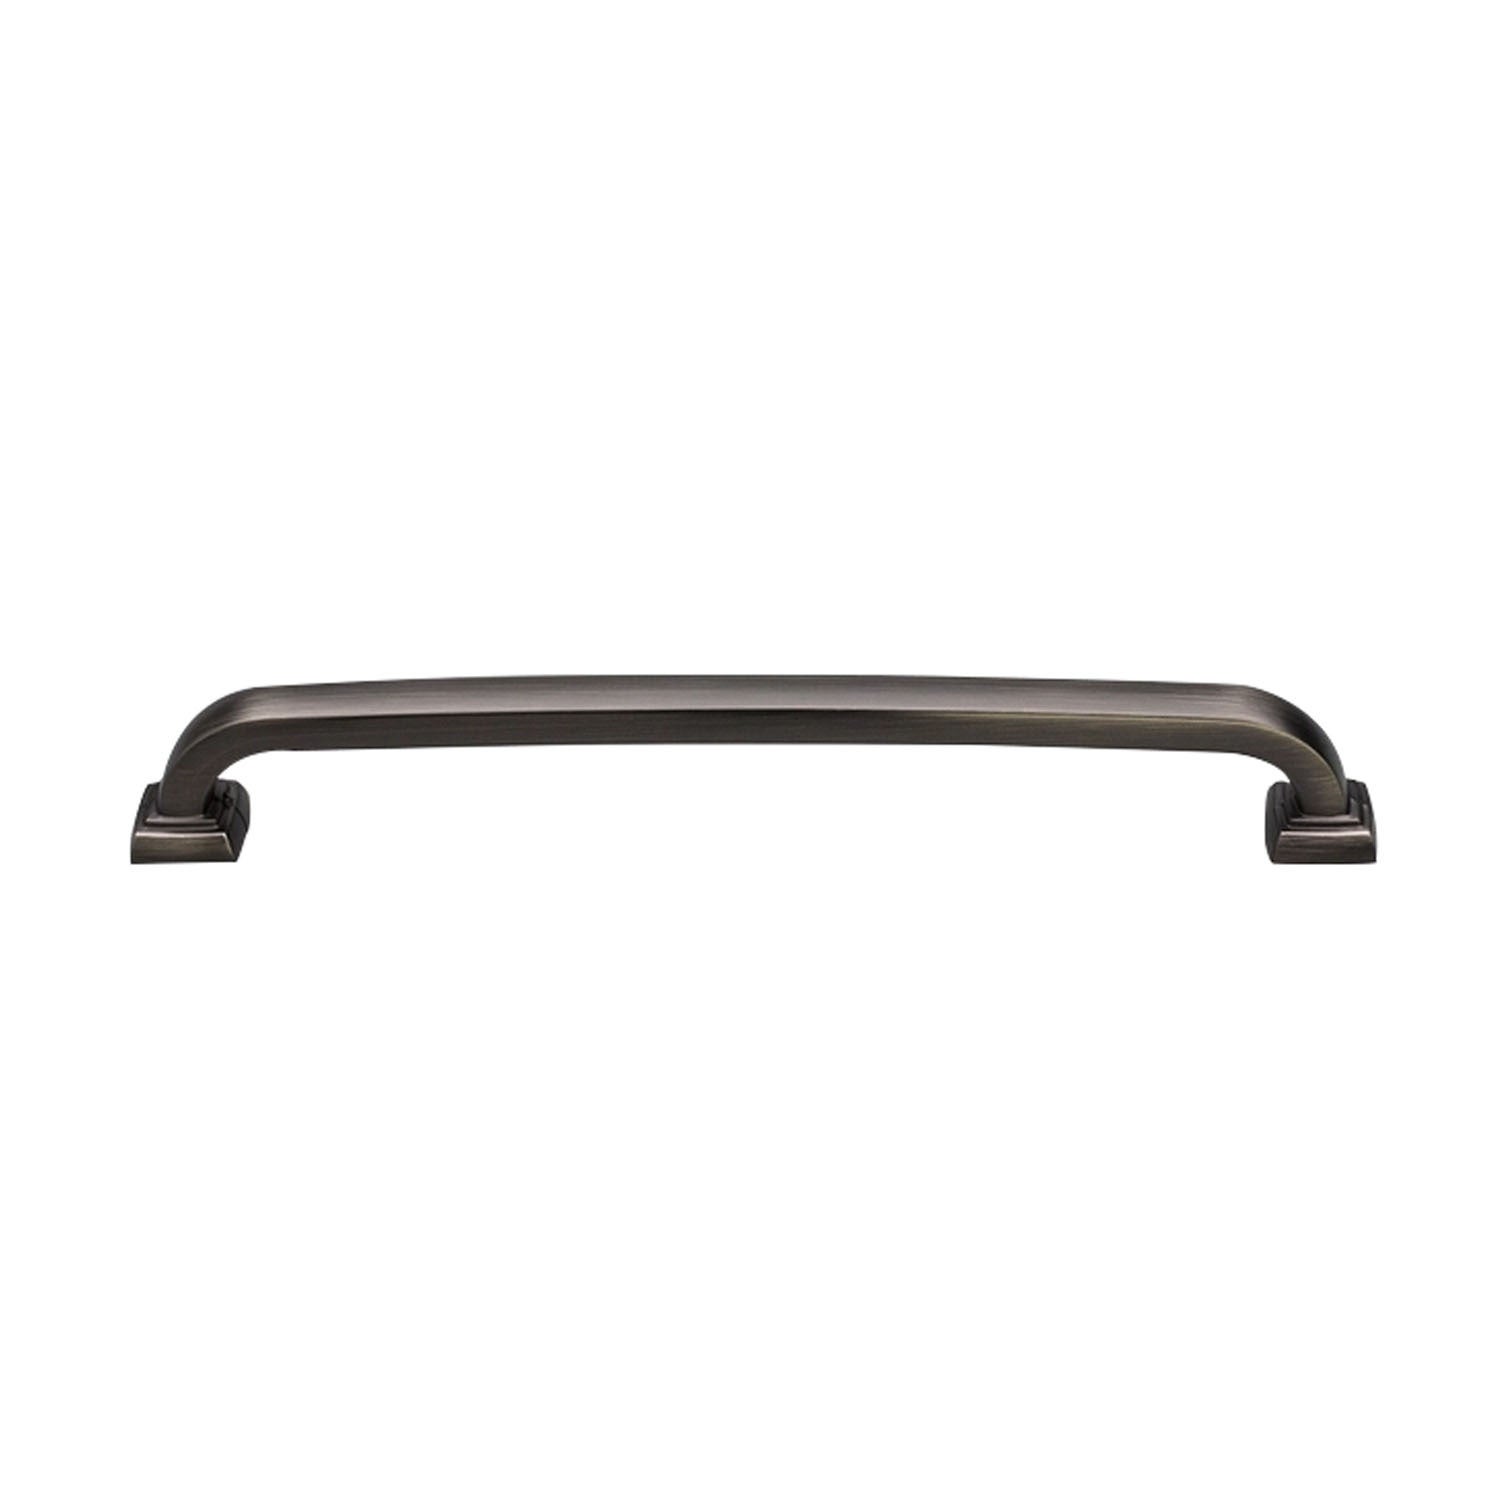 Kethy HT576 Darwen Cabinet Pull Handle - Available In Various Finishes and Sizes